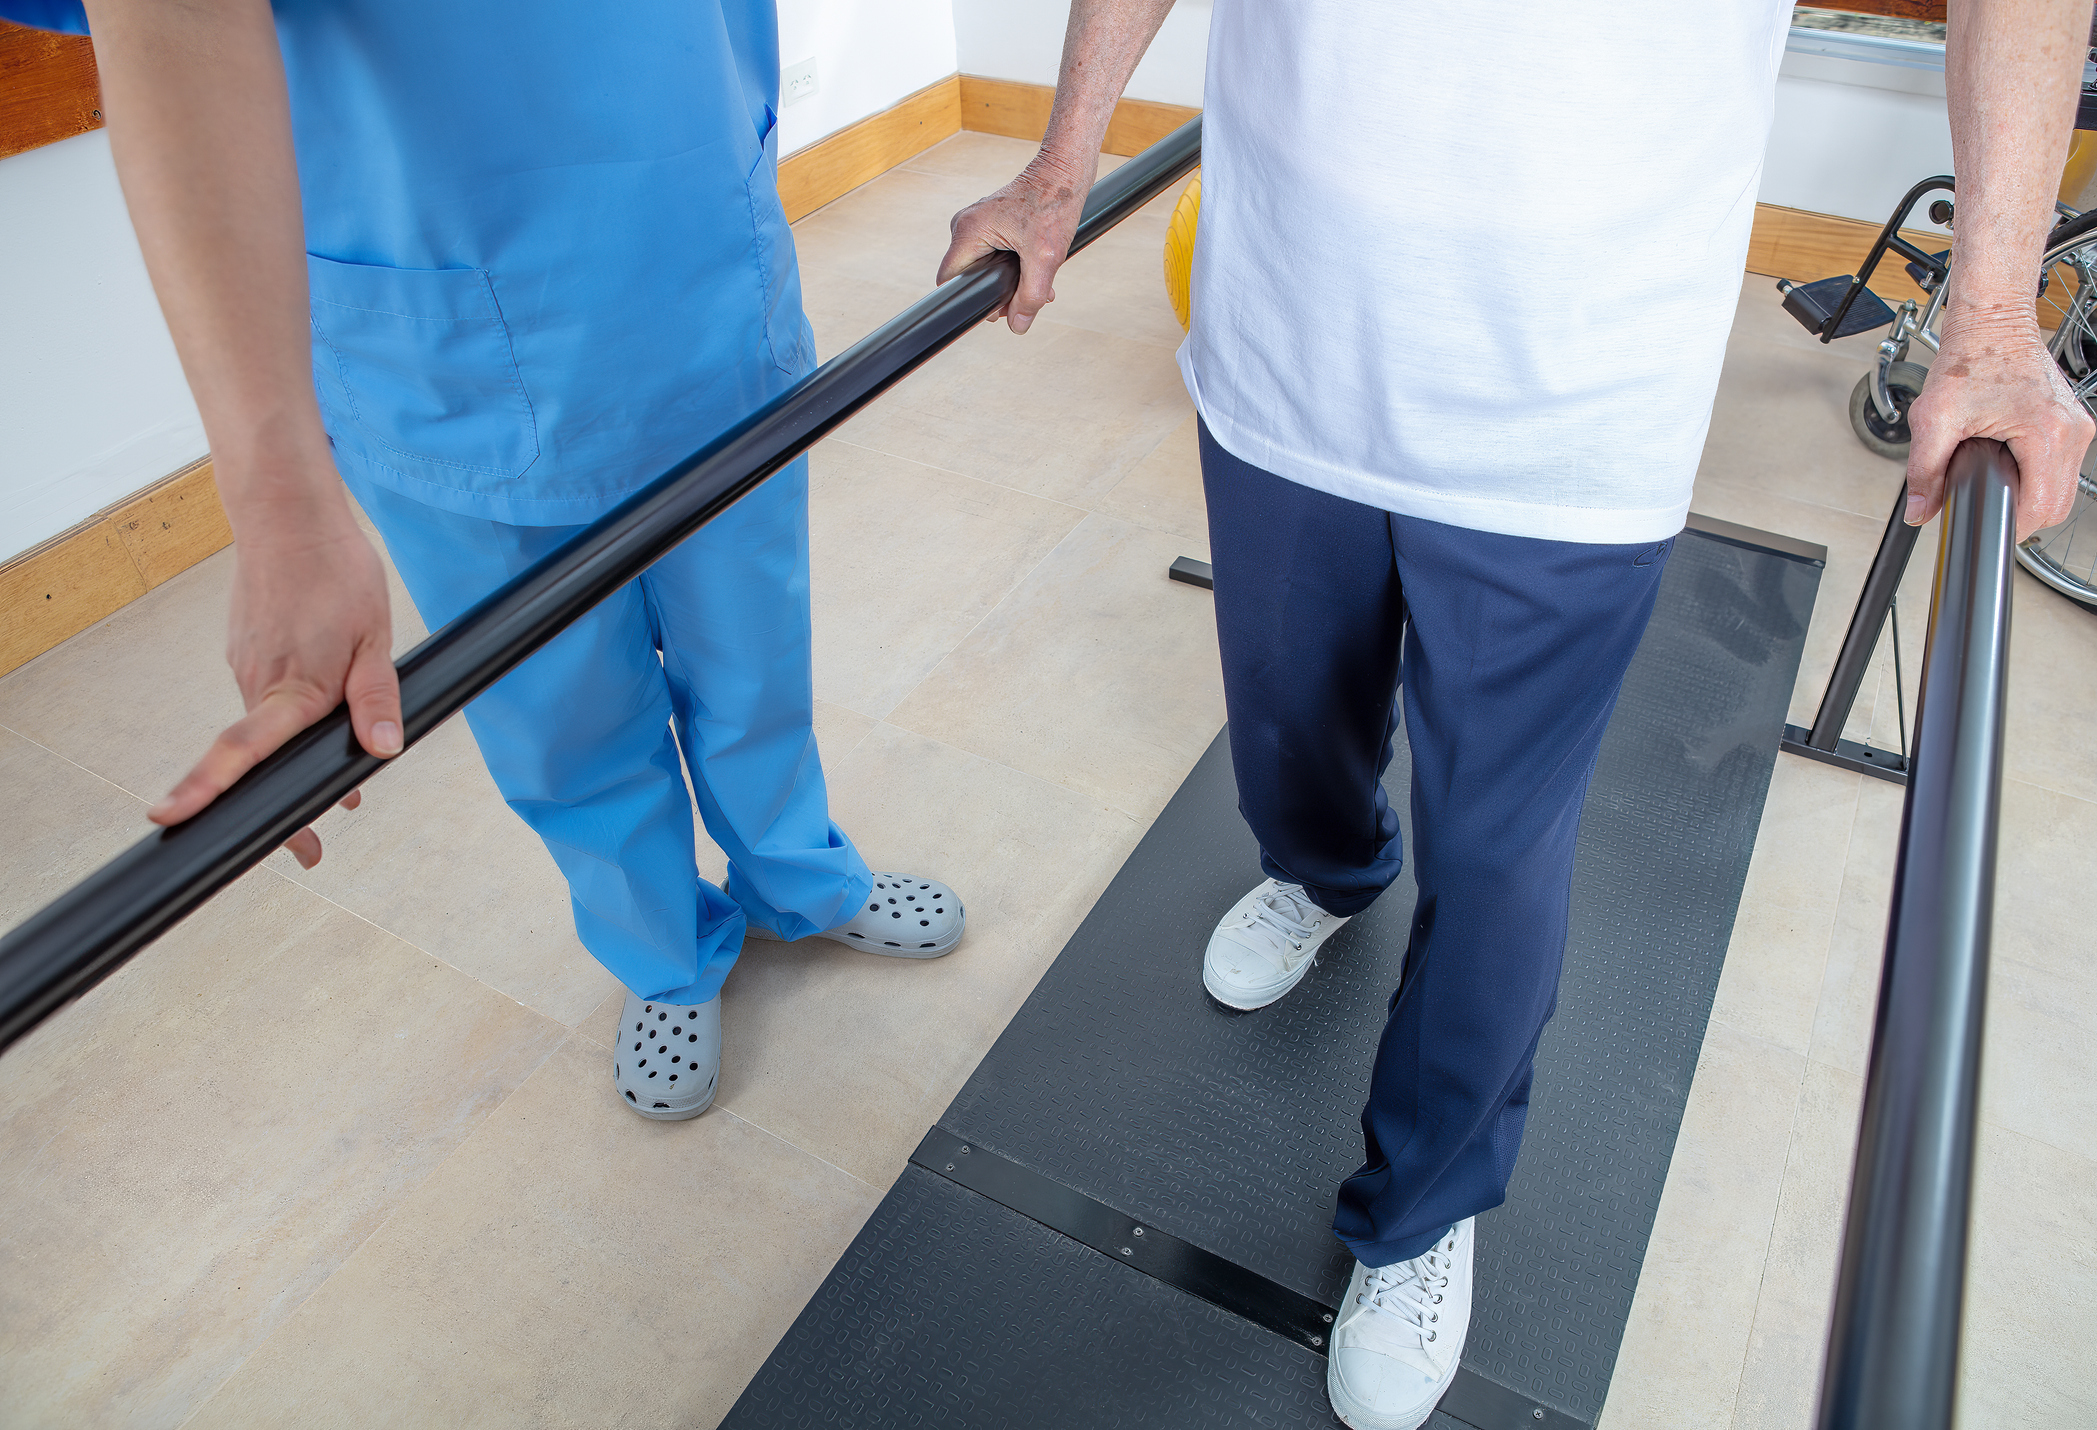 person walking with bars in rehabilitation and attended by another person in hospital scrubs